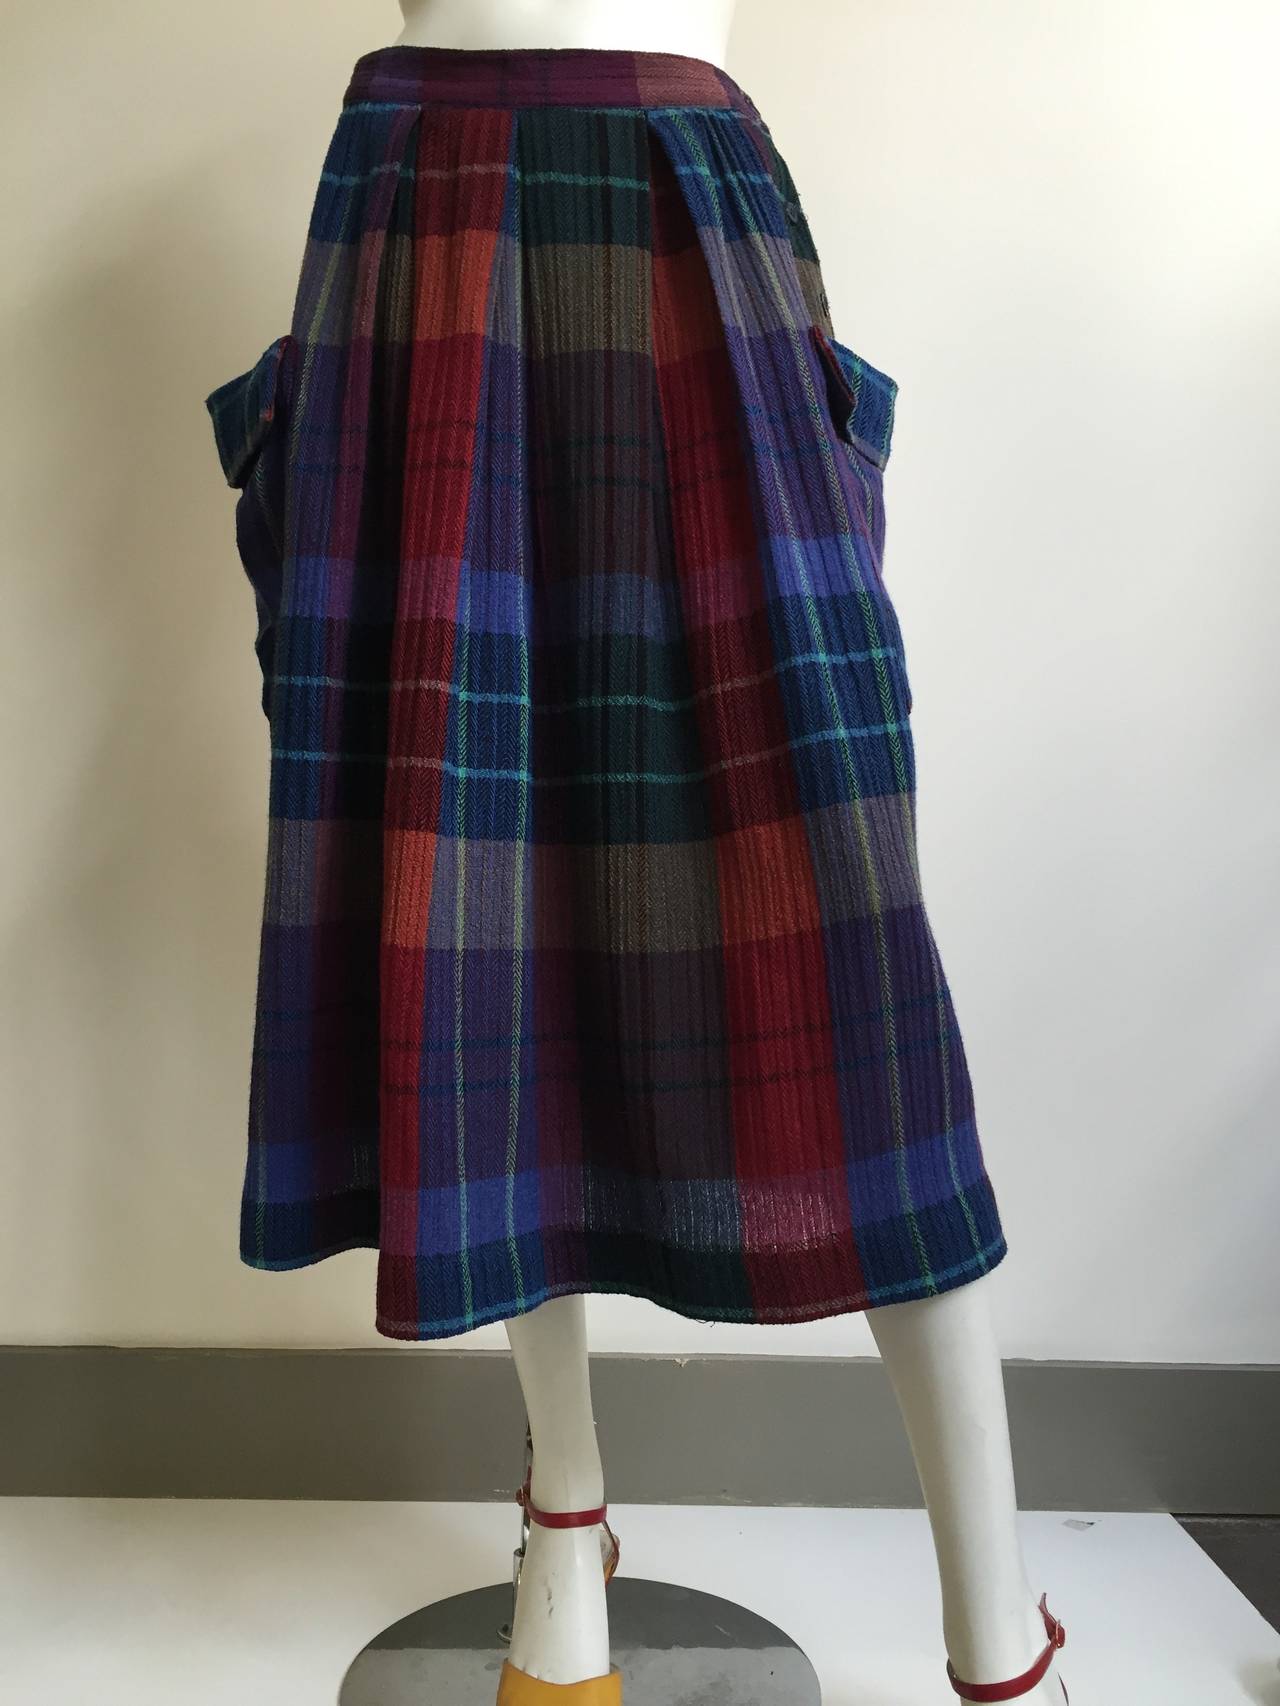 Mary McFadden Signature Collection 1980s plaid pleated skirt with side pockets vintage size 10 but fits a modern size 6 ( please see and use measurements). The fabric is from Italy and it was made in the USA. There are 3 buttons on side of skirt.